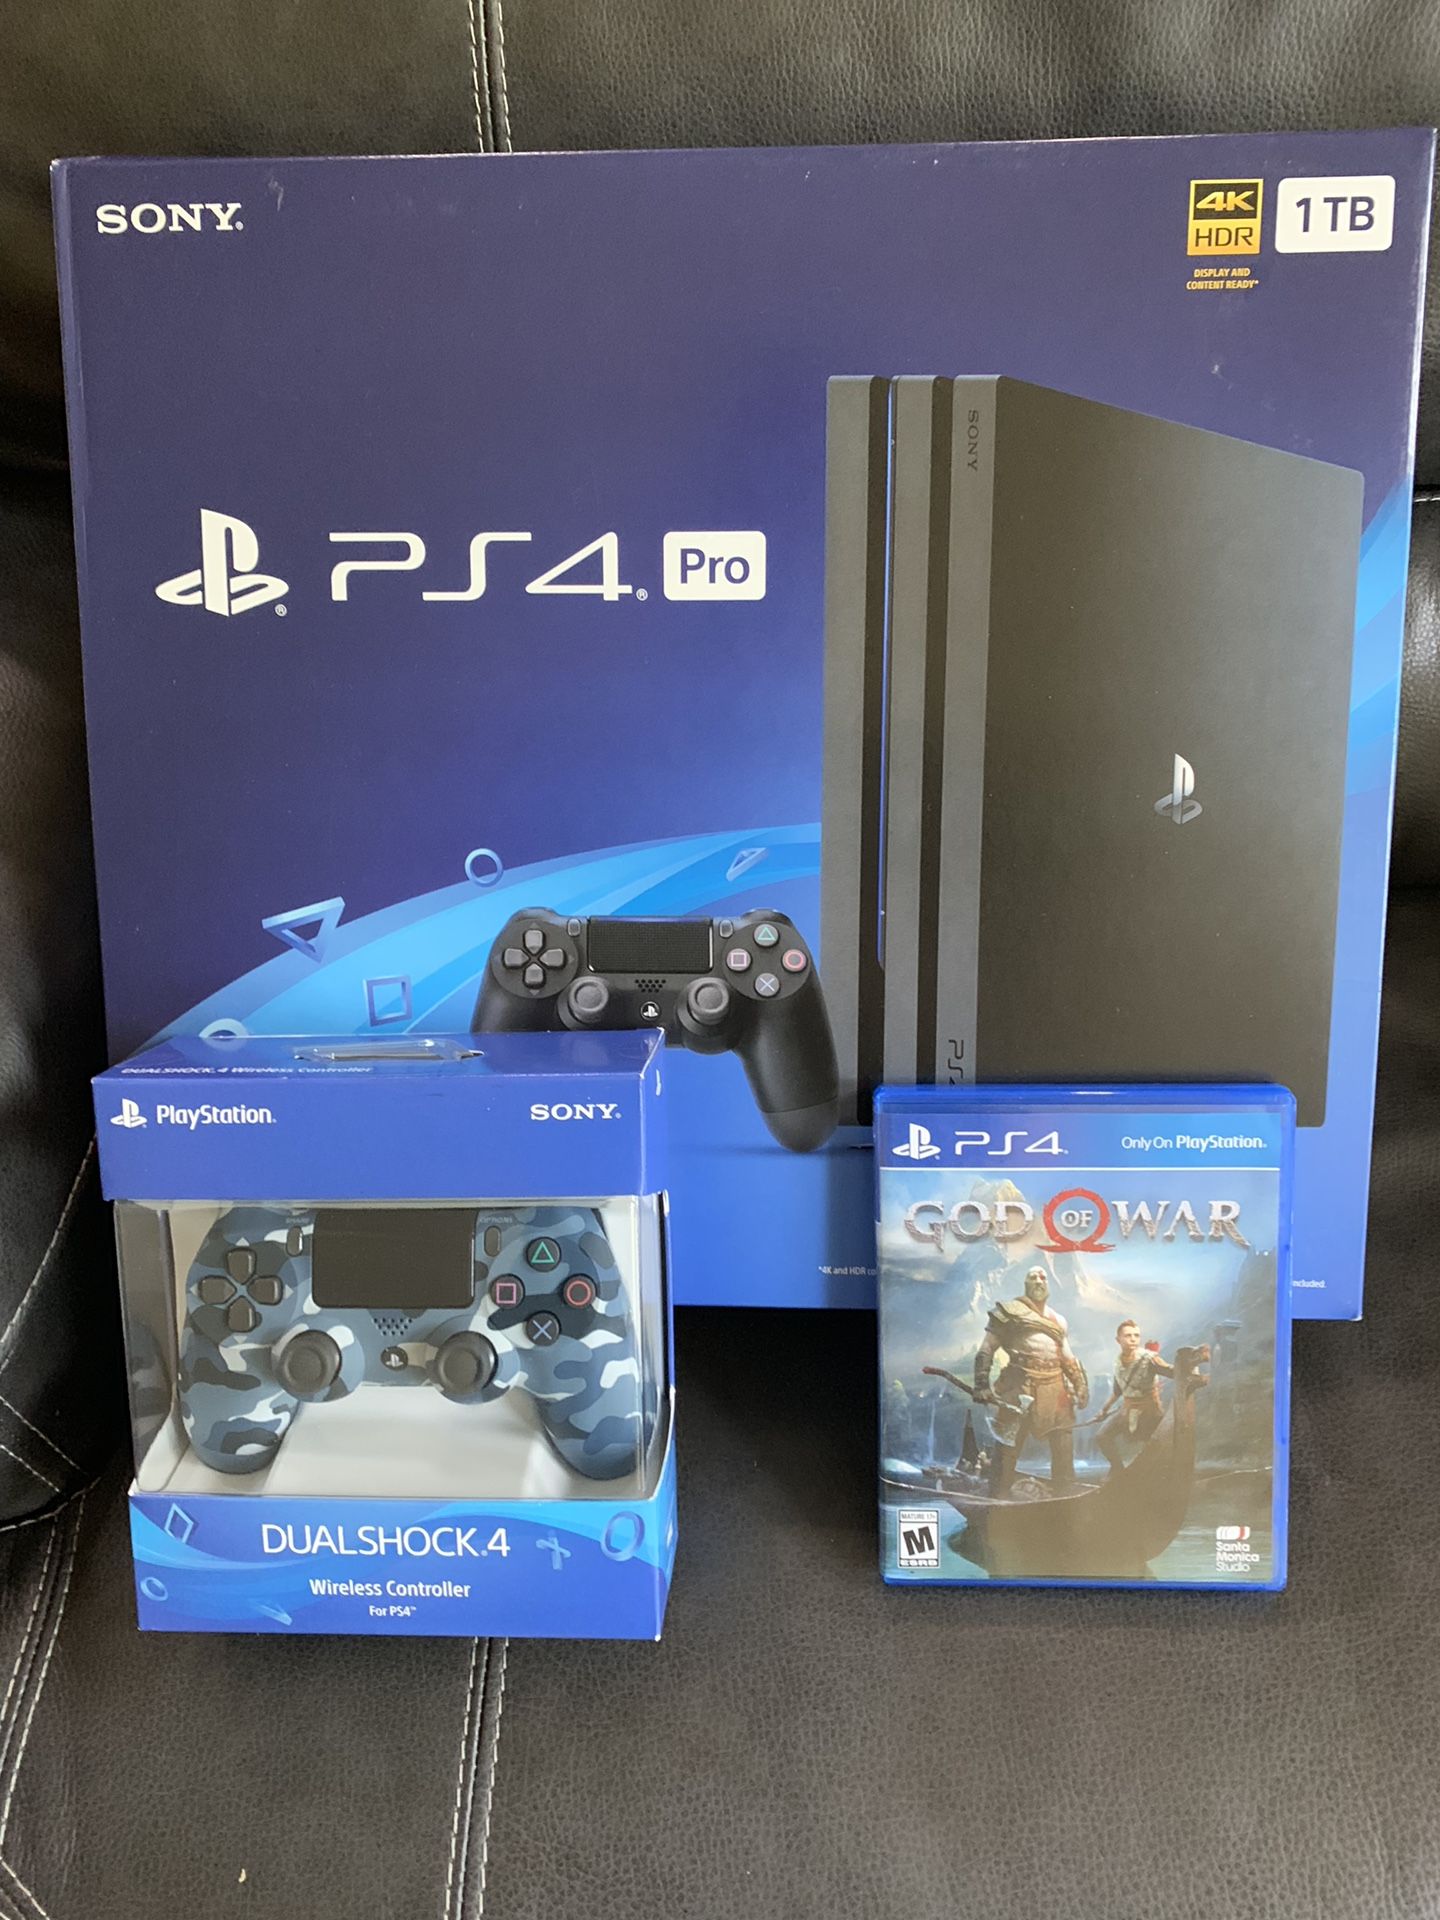 PS4 Pro, extra controller and God of War